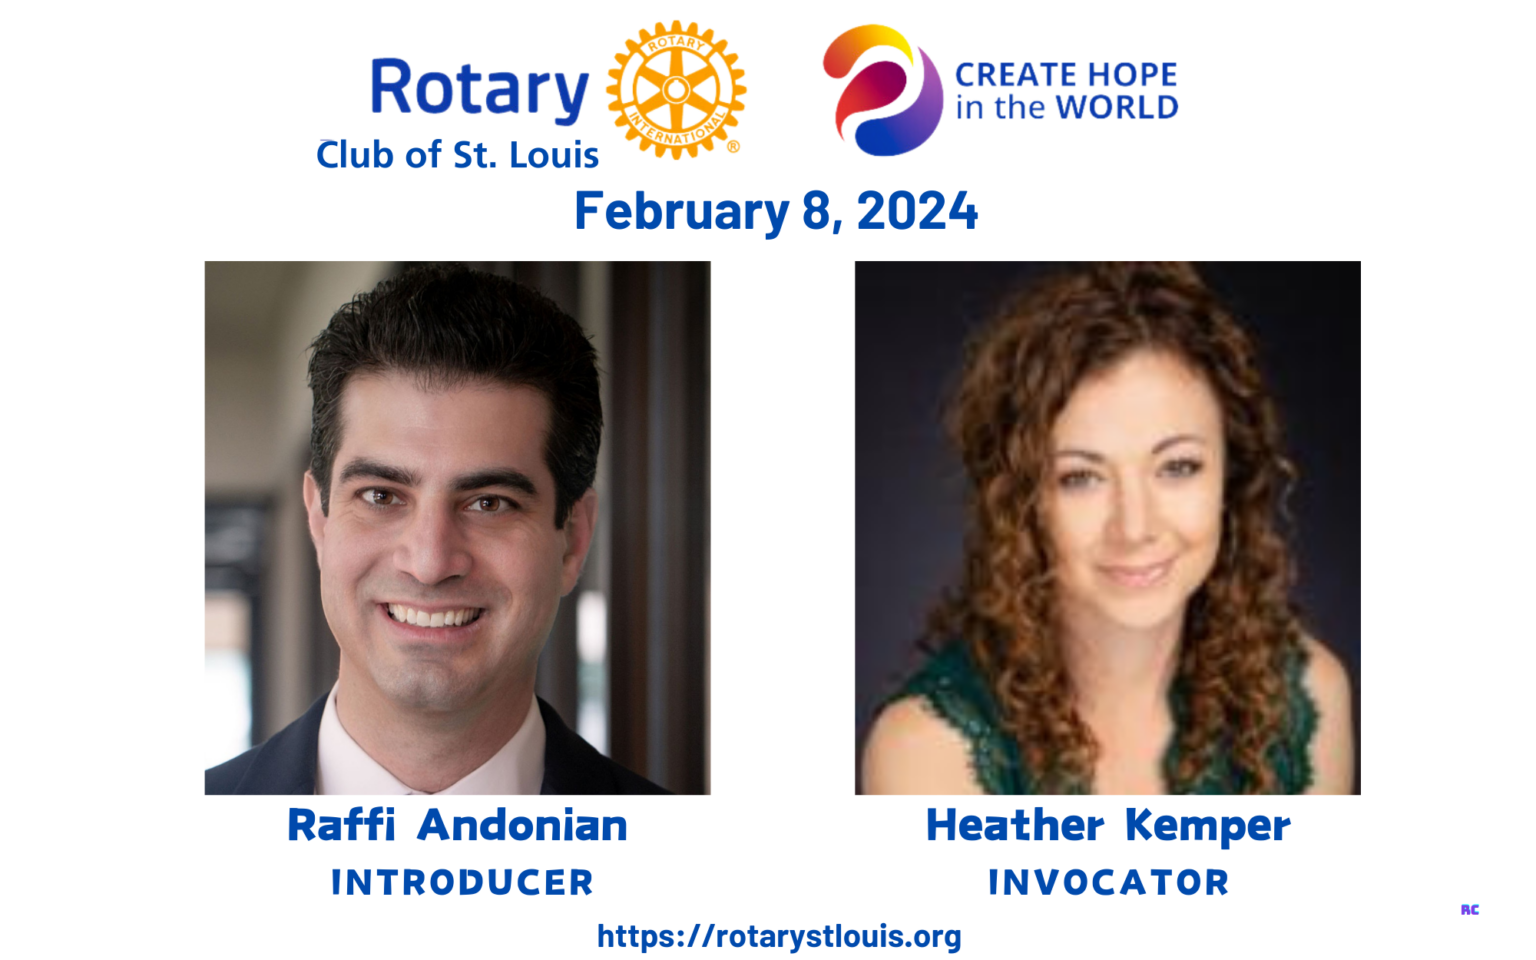 Raffi Andonian, Introducer and Heather Kemper, Invocator 2-8-24